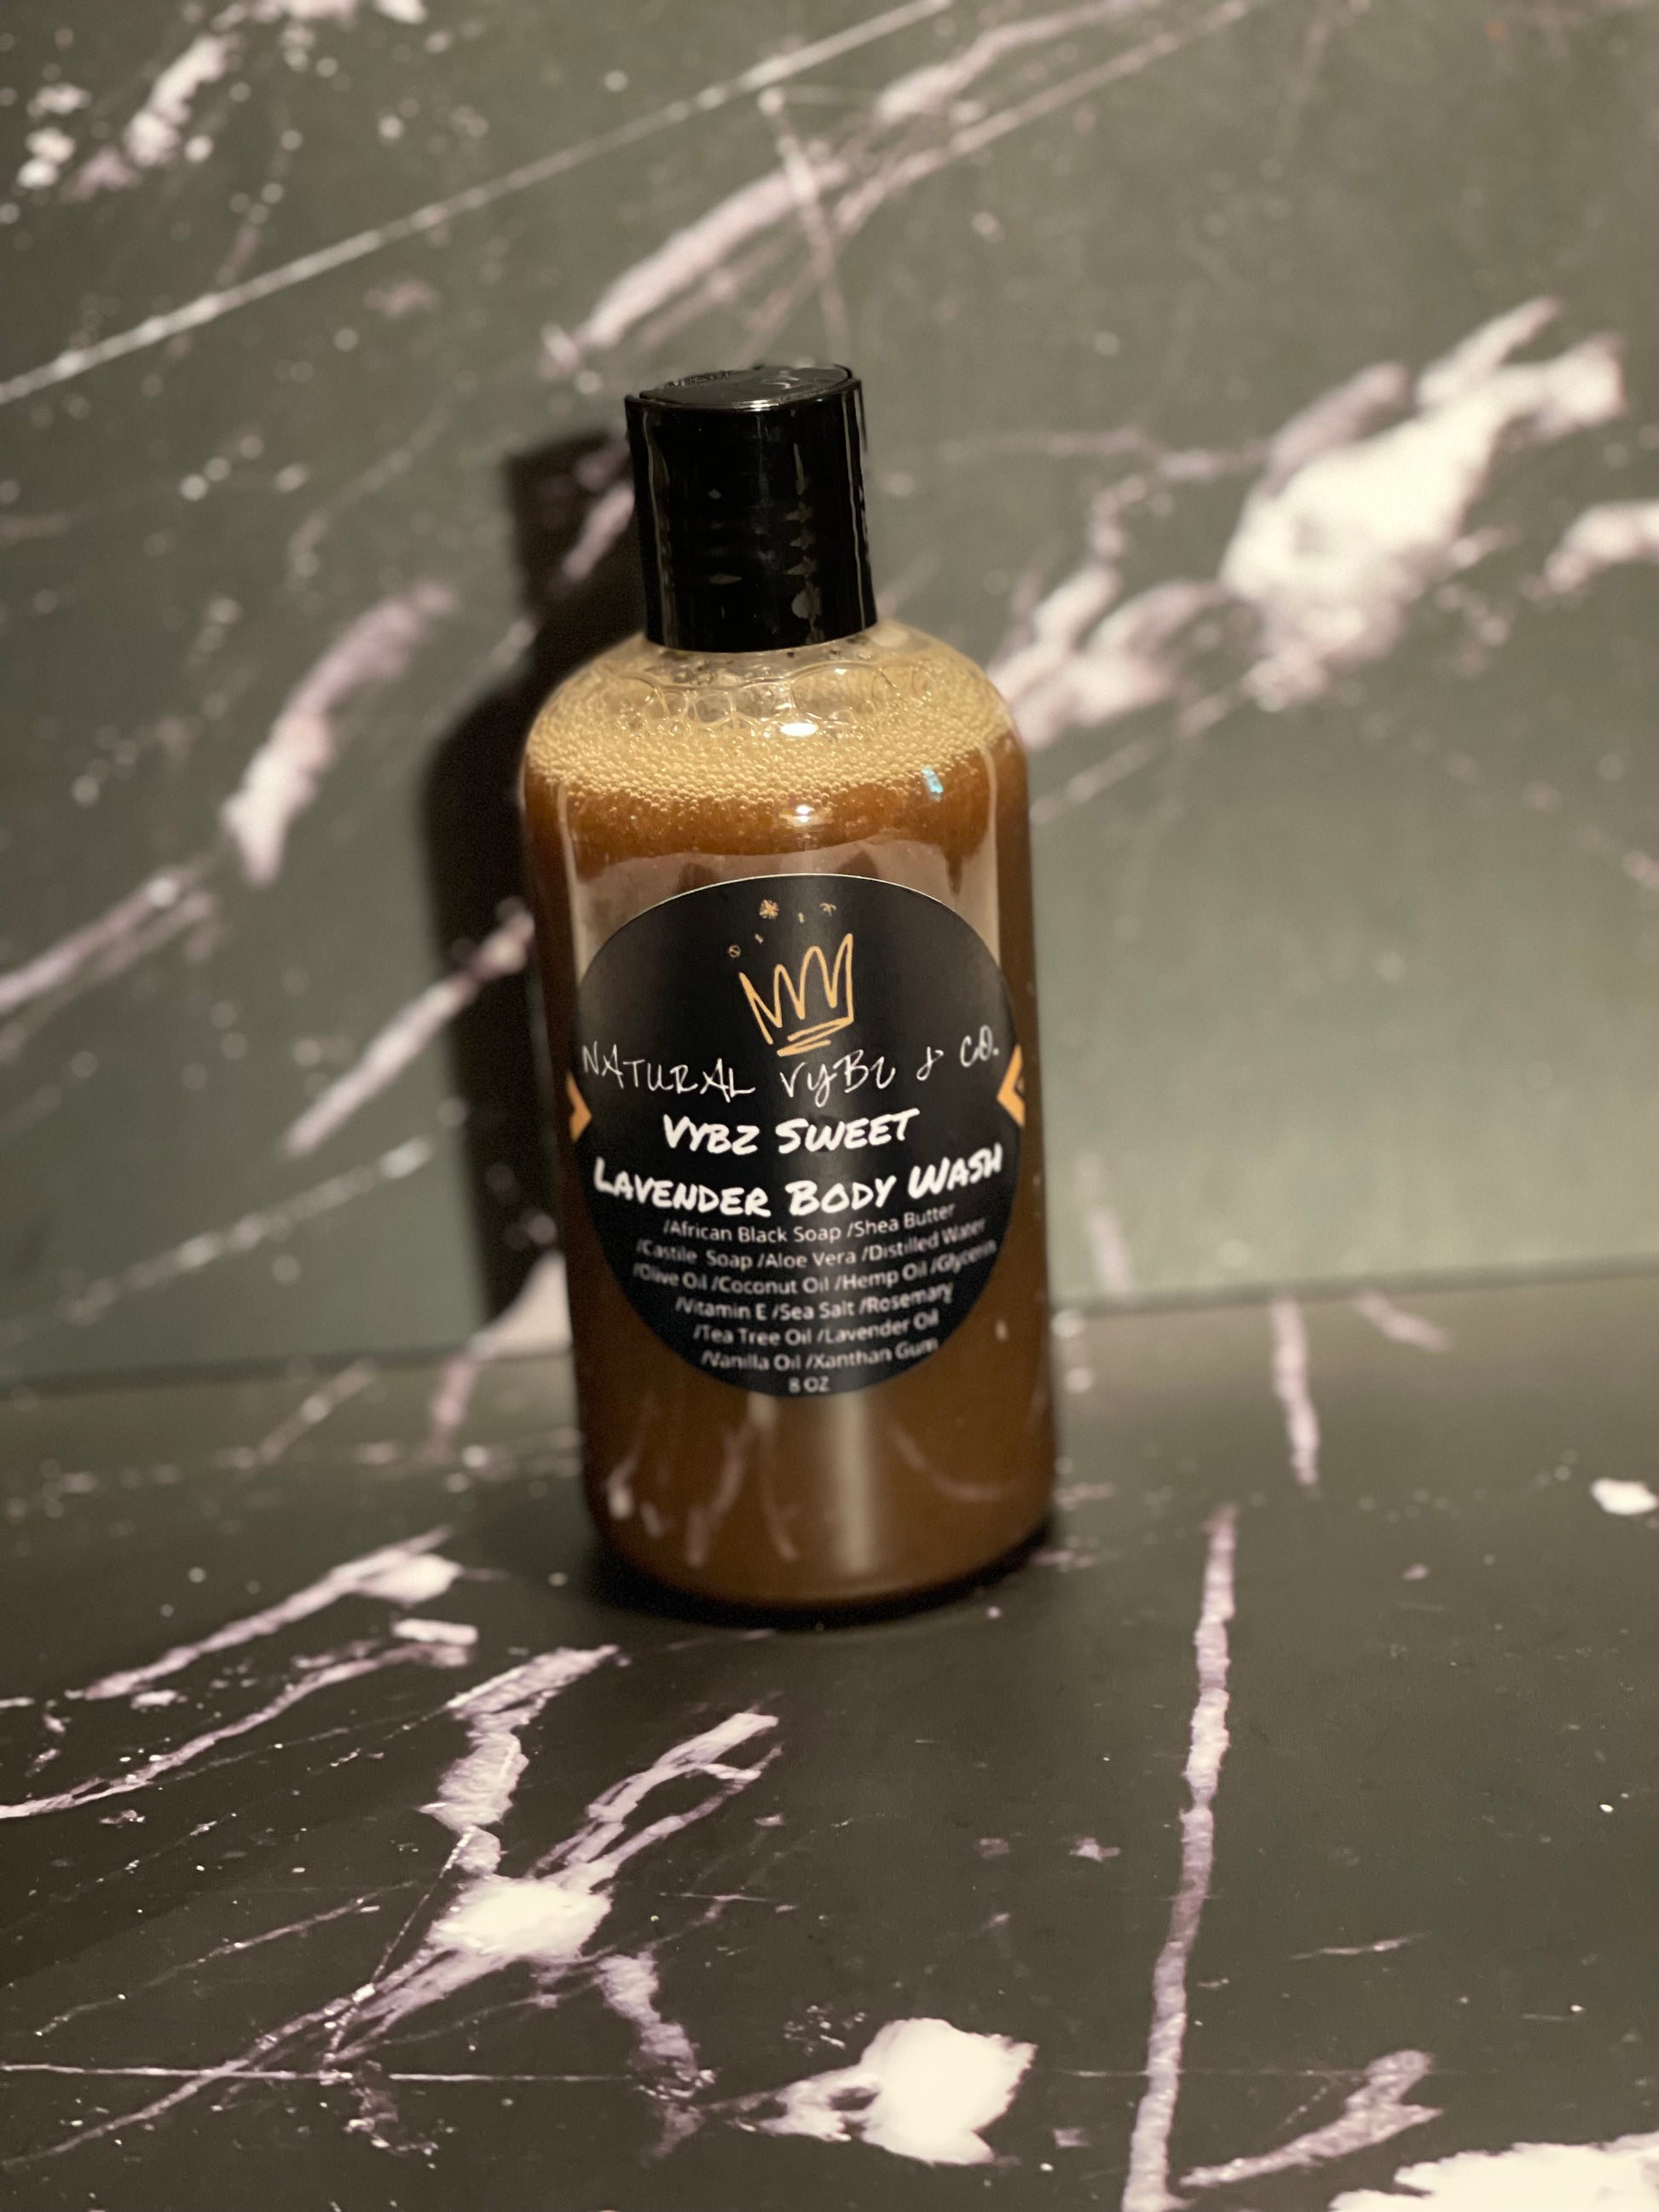 all natural body wash created from african black soap that men and women can use